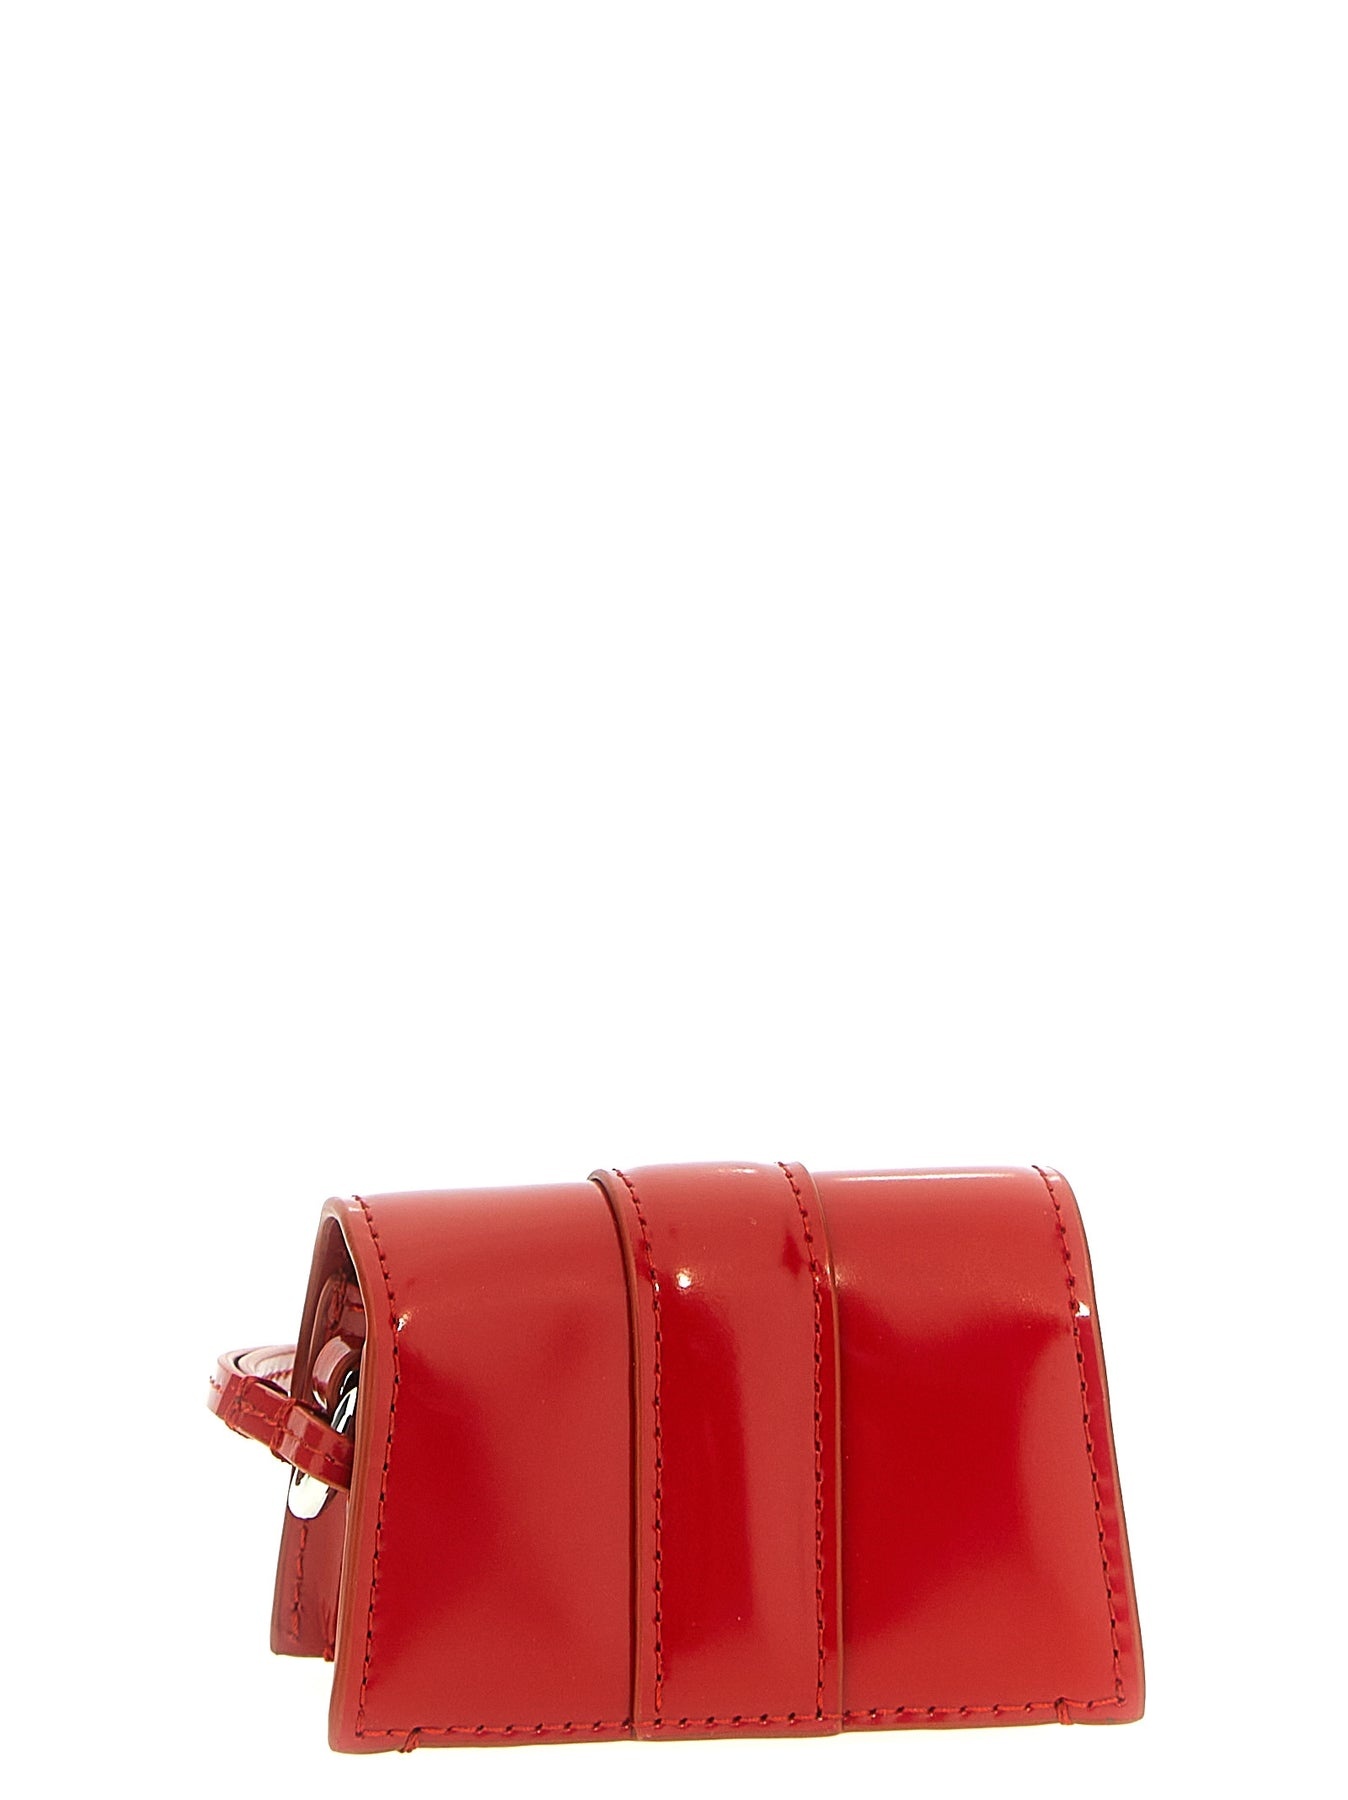 JACQUEMUS, Red Women's Wallet